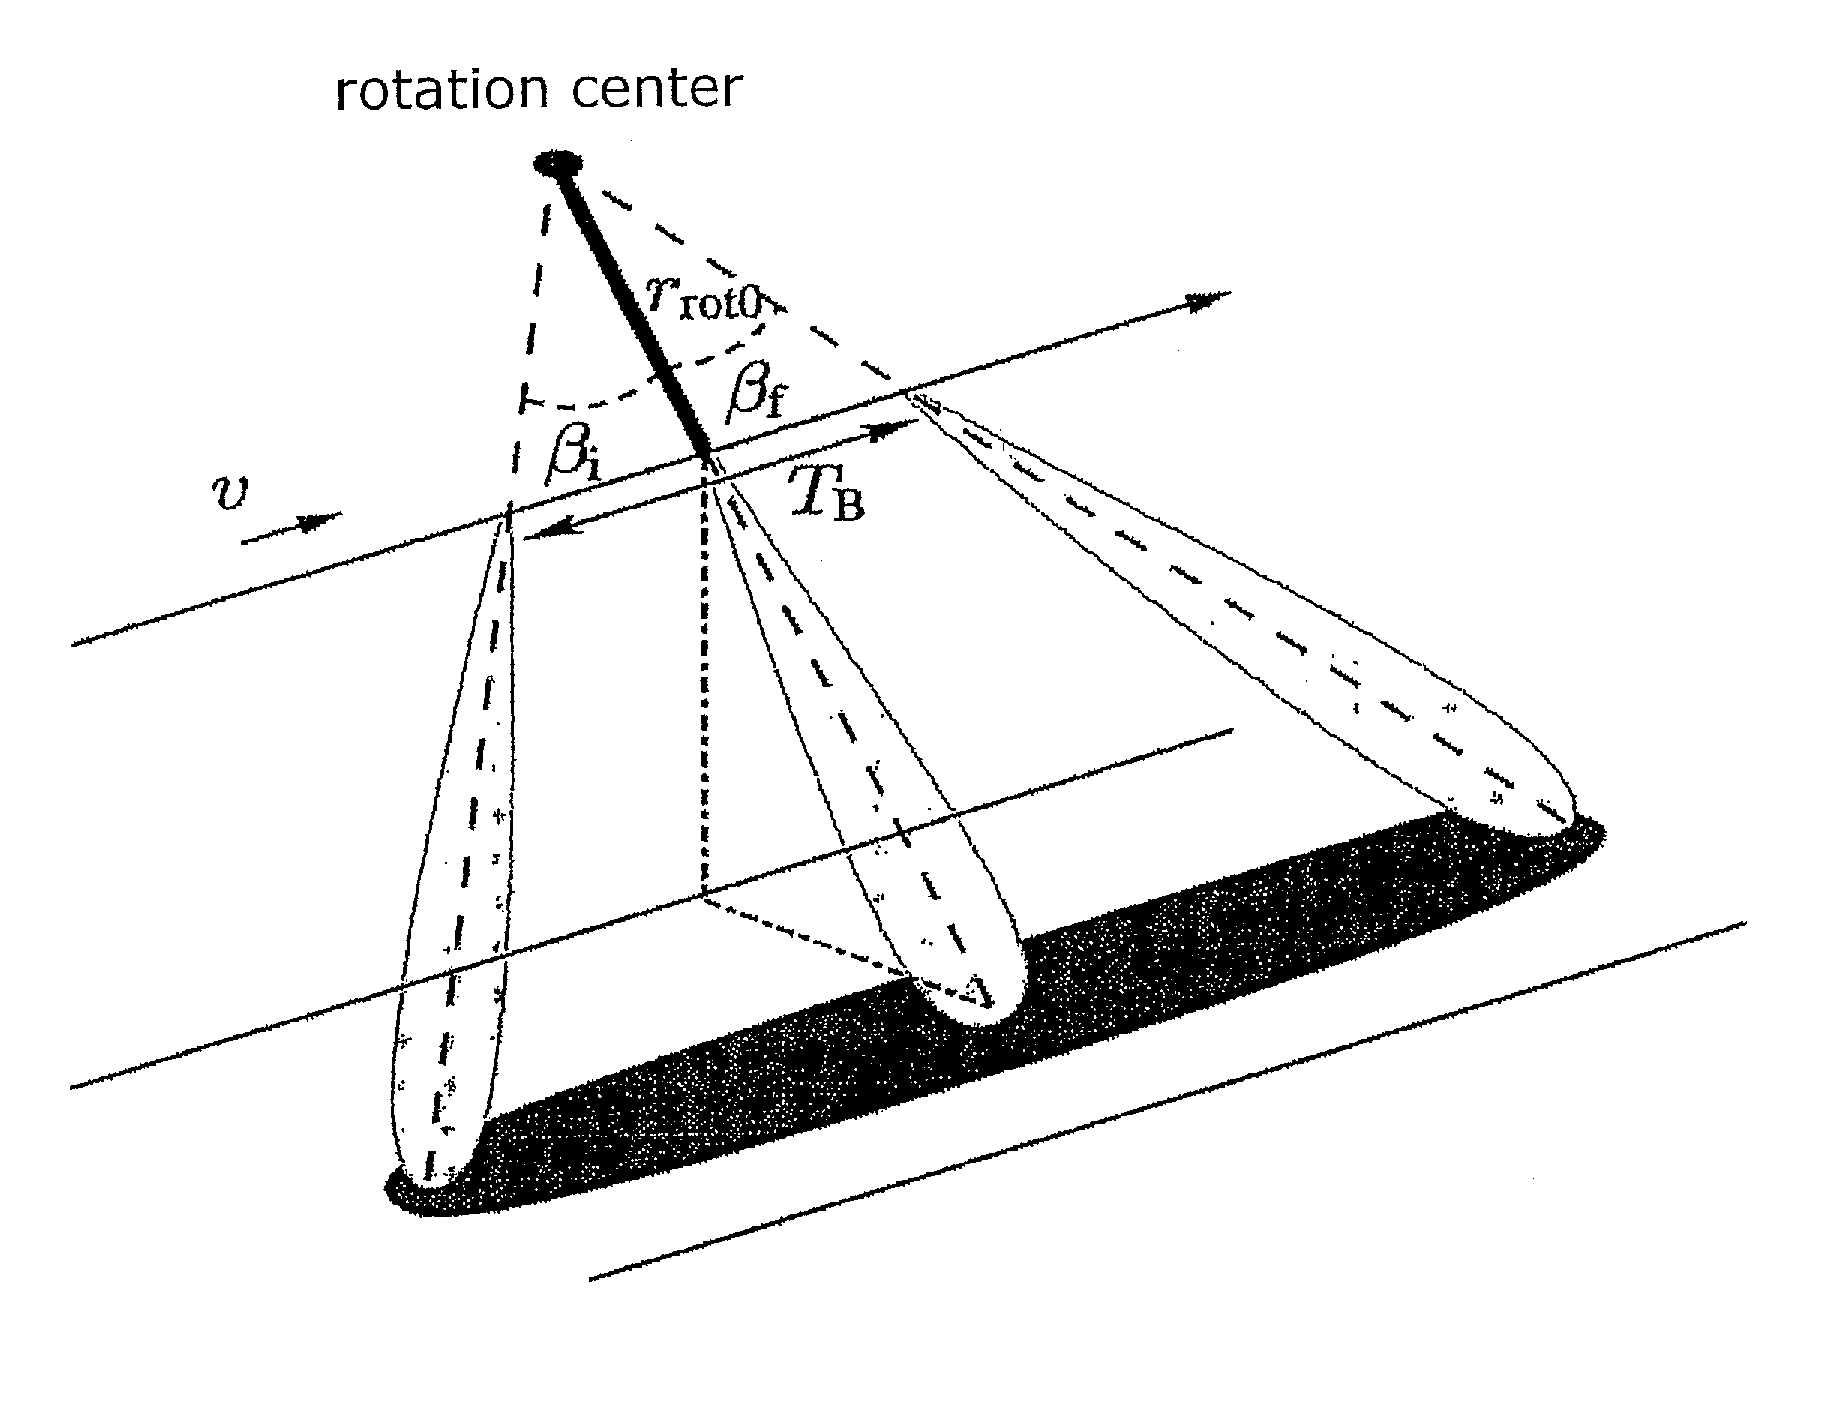 Method for processing TOPS (terrain observation by progressive scan)-SAR (synthetic aperture radar)-raw data